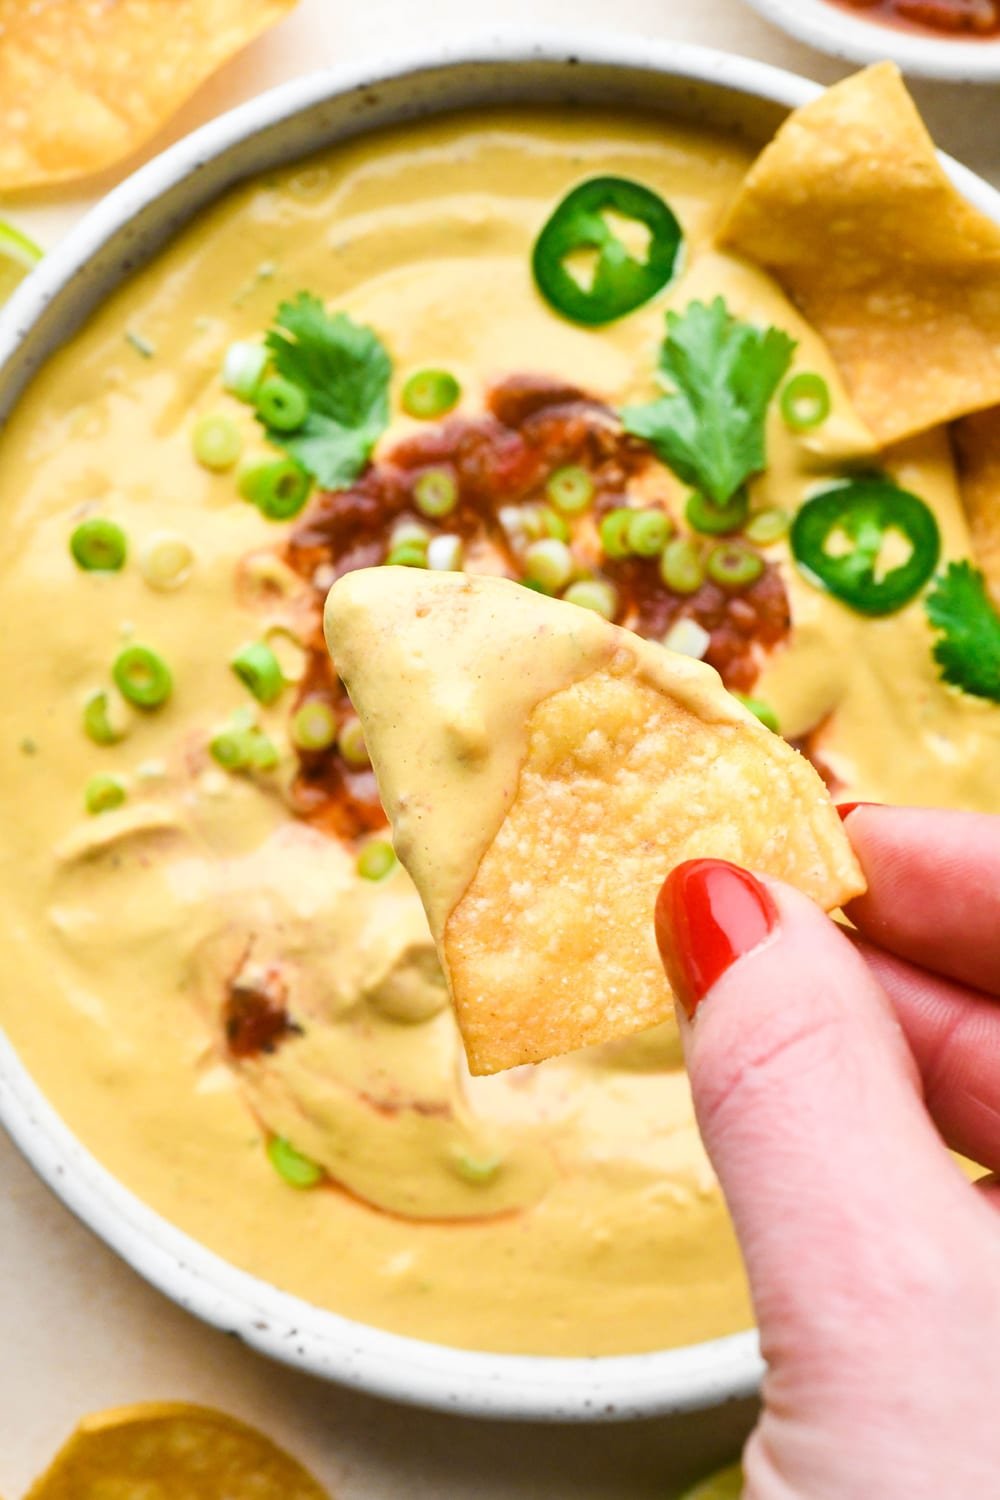 A hand holding a tortilla chip that has been dipped in the cashew queso above the bowl of dip.